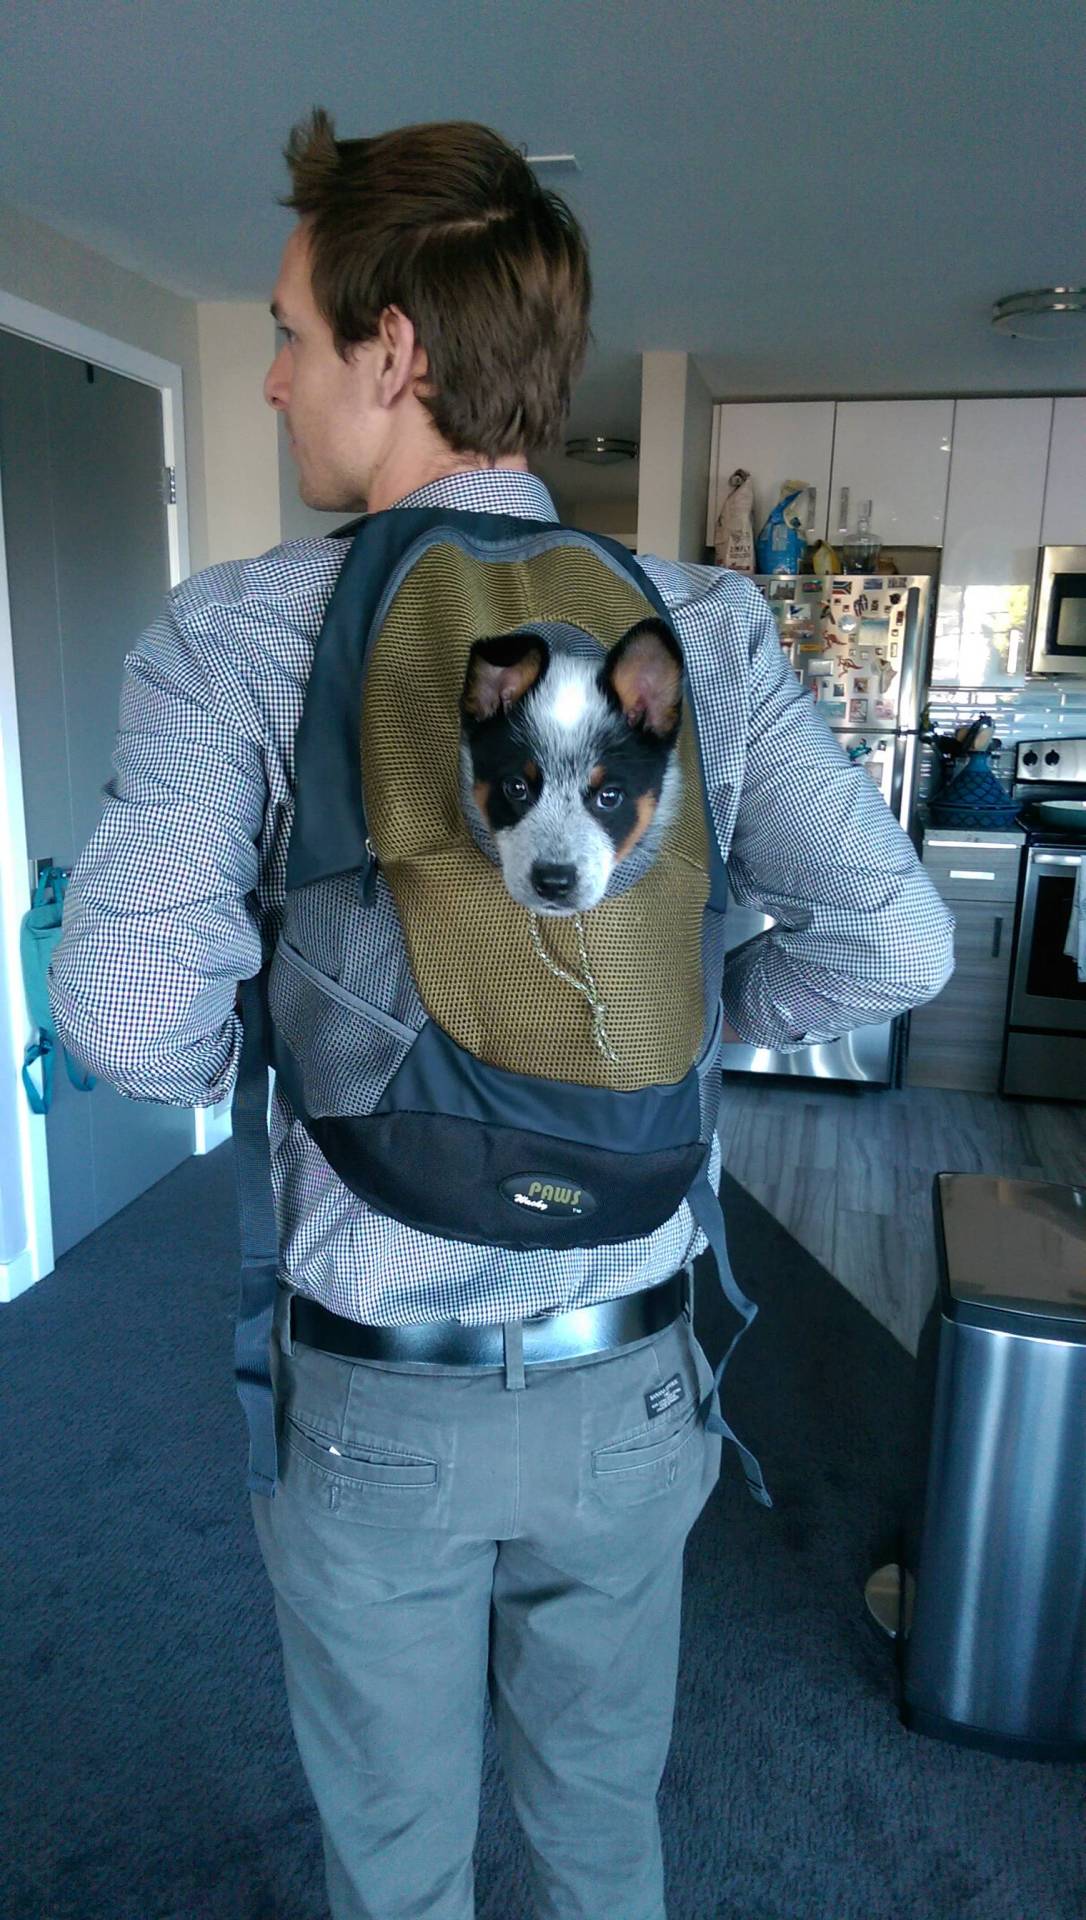 I read somewhere that dogs are pack animals. (Source: http://ift.tt/2cNvnL7)